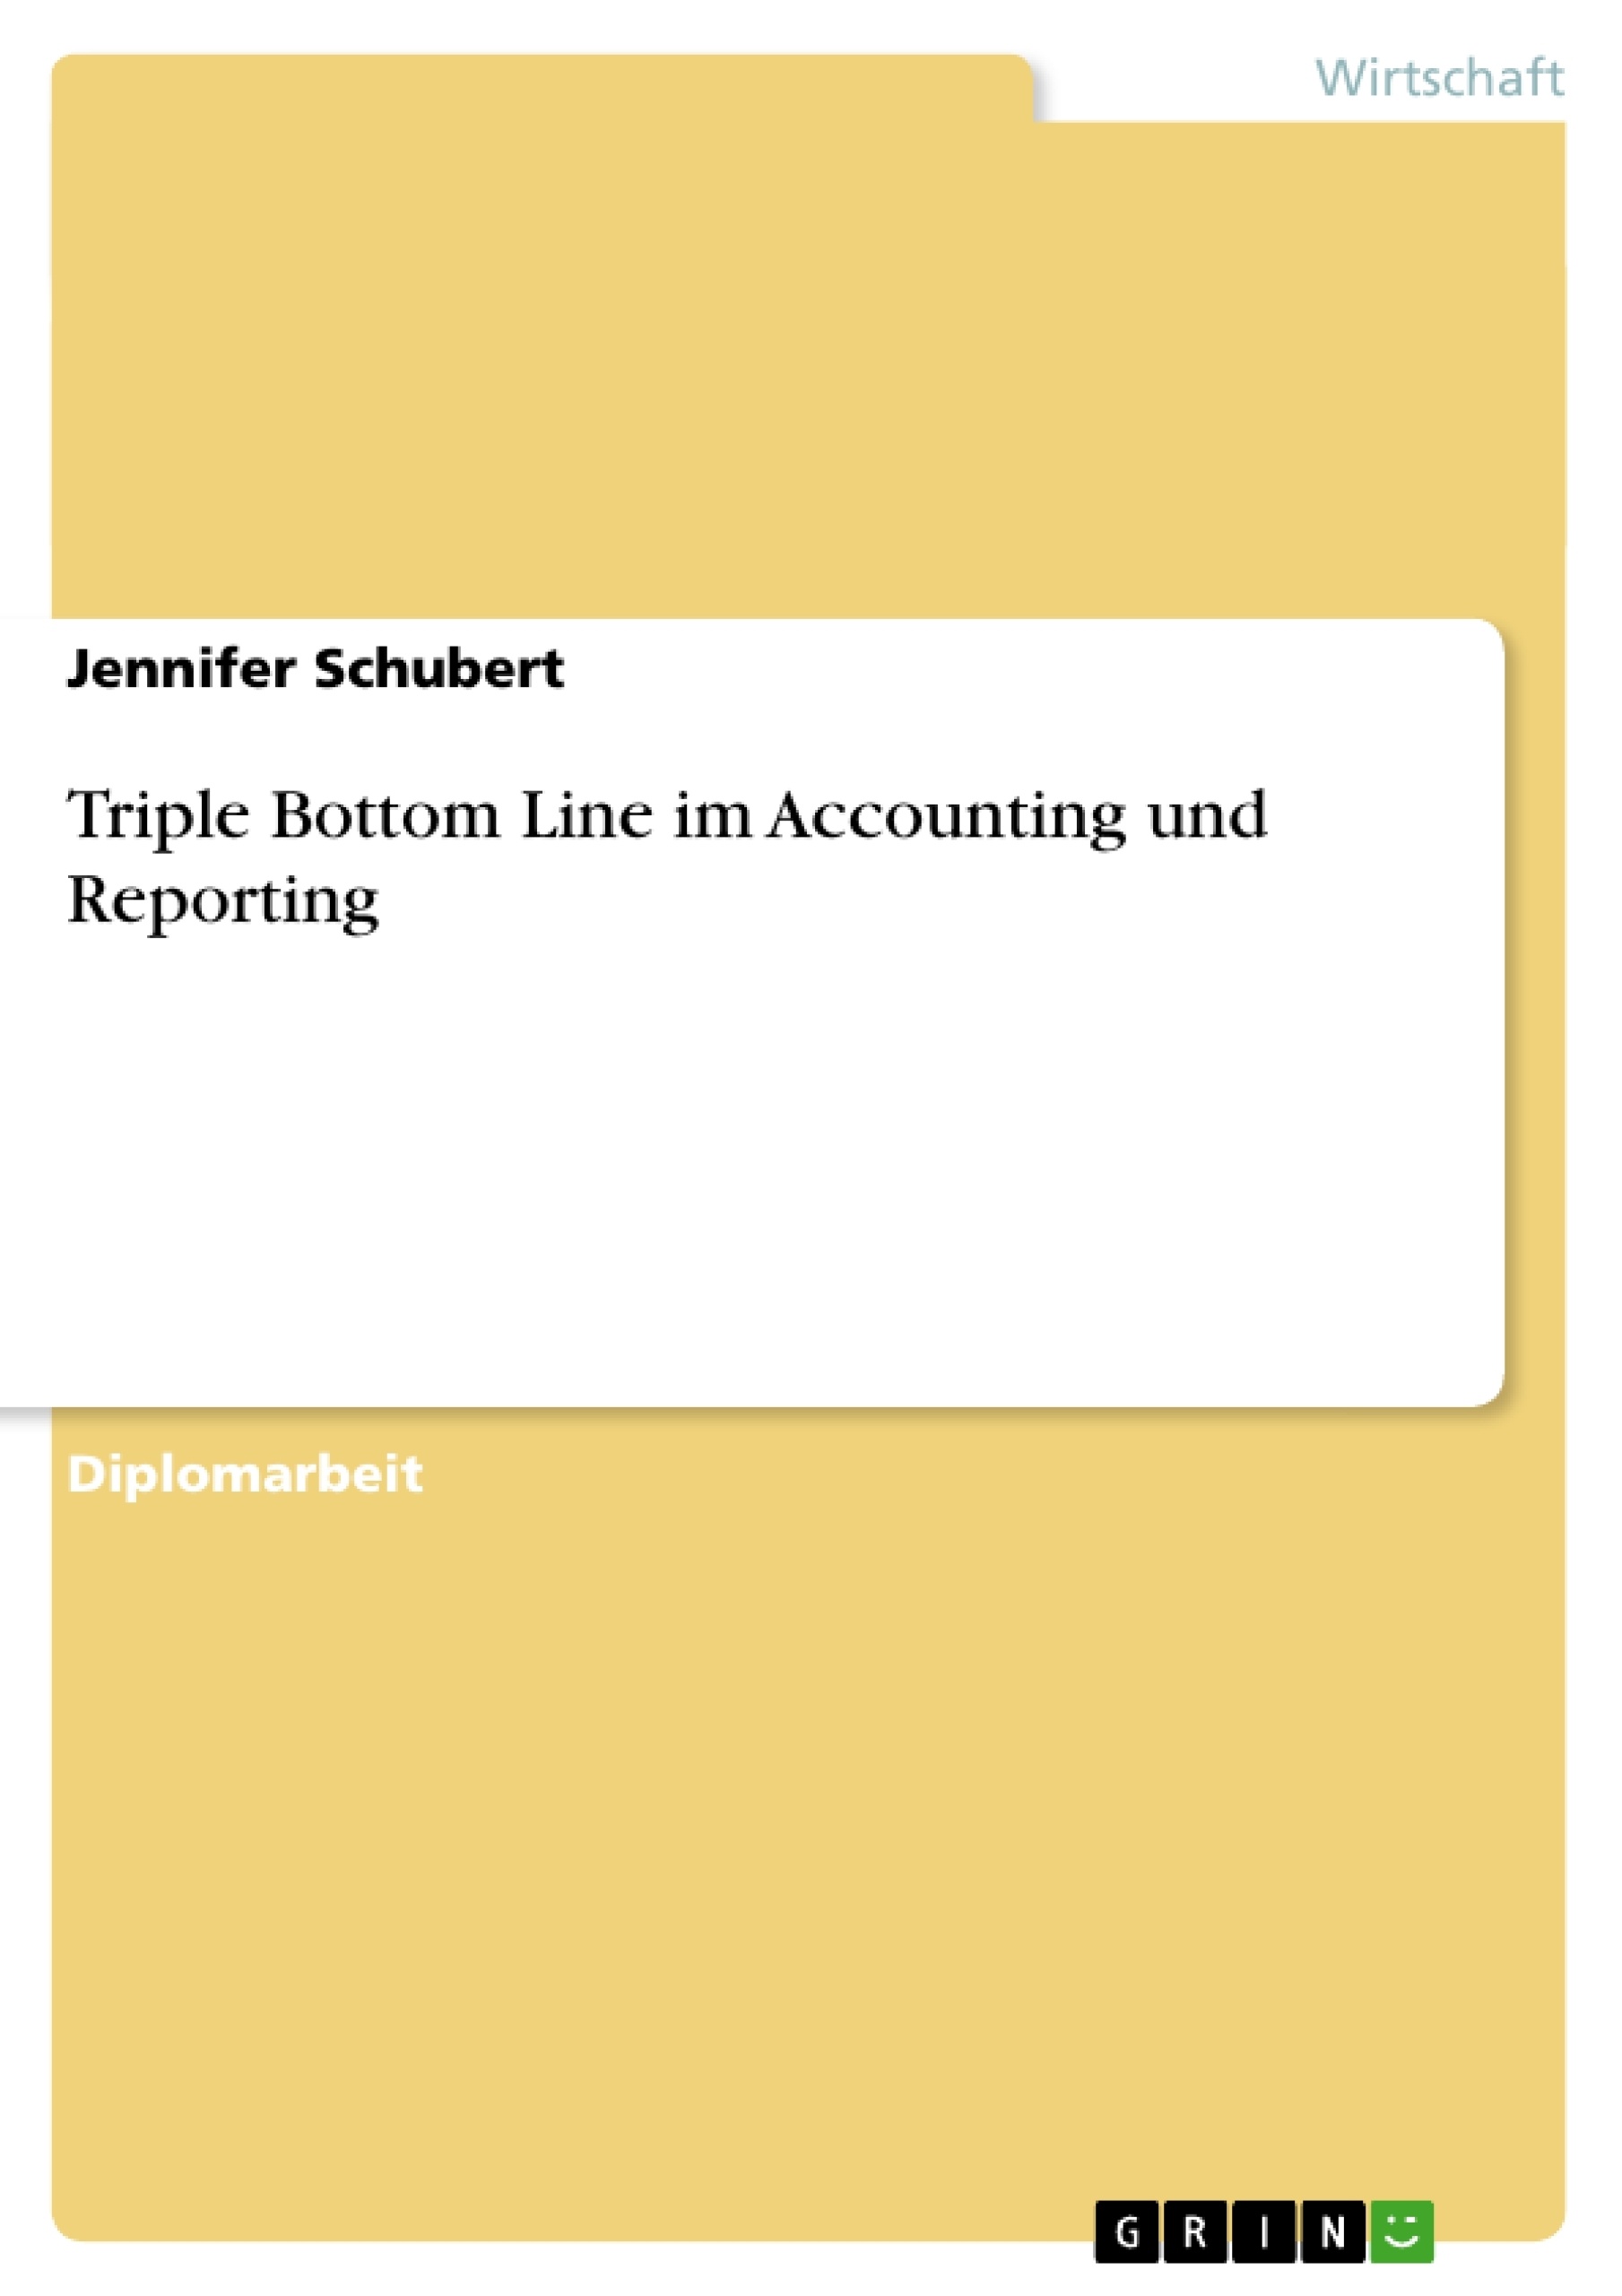 Título: Triple Bottom Line im Accounting und Reporting